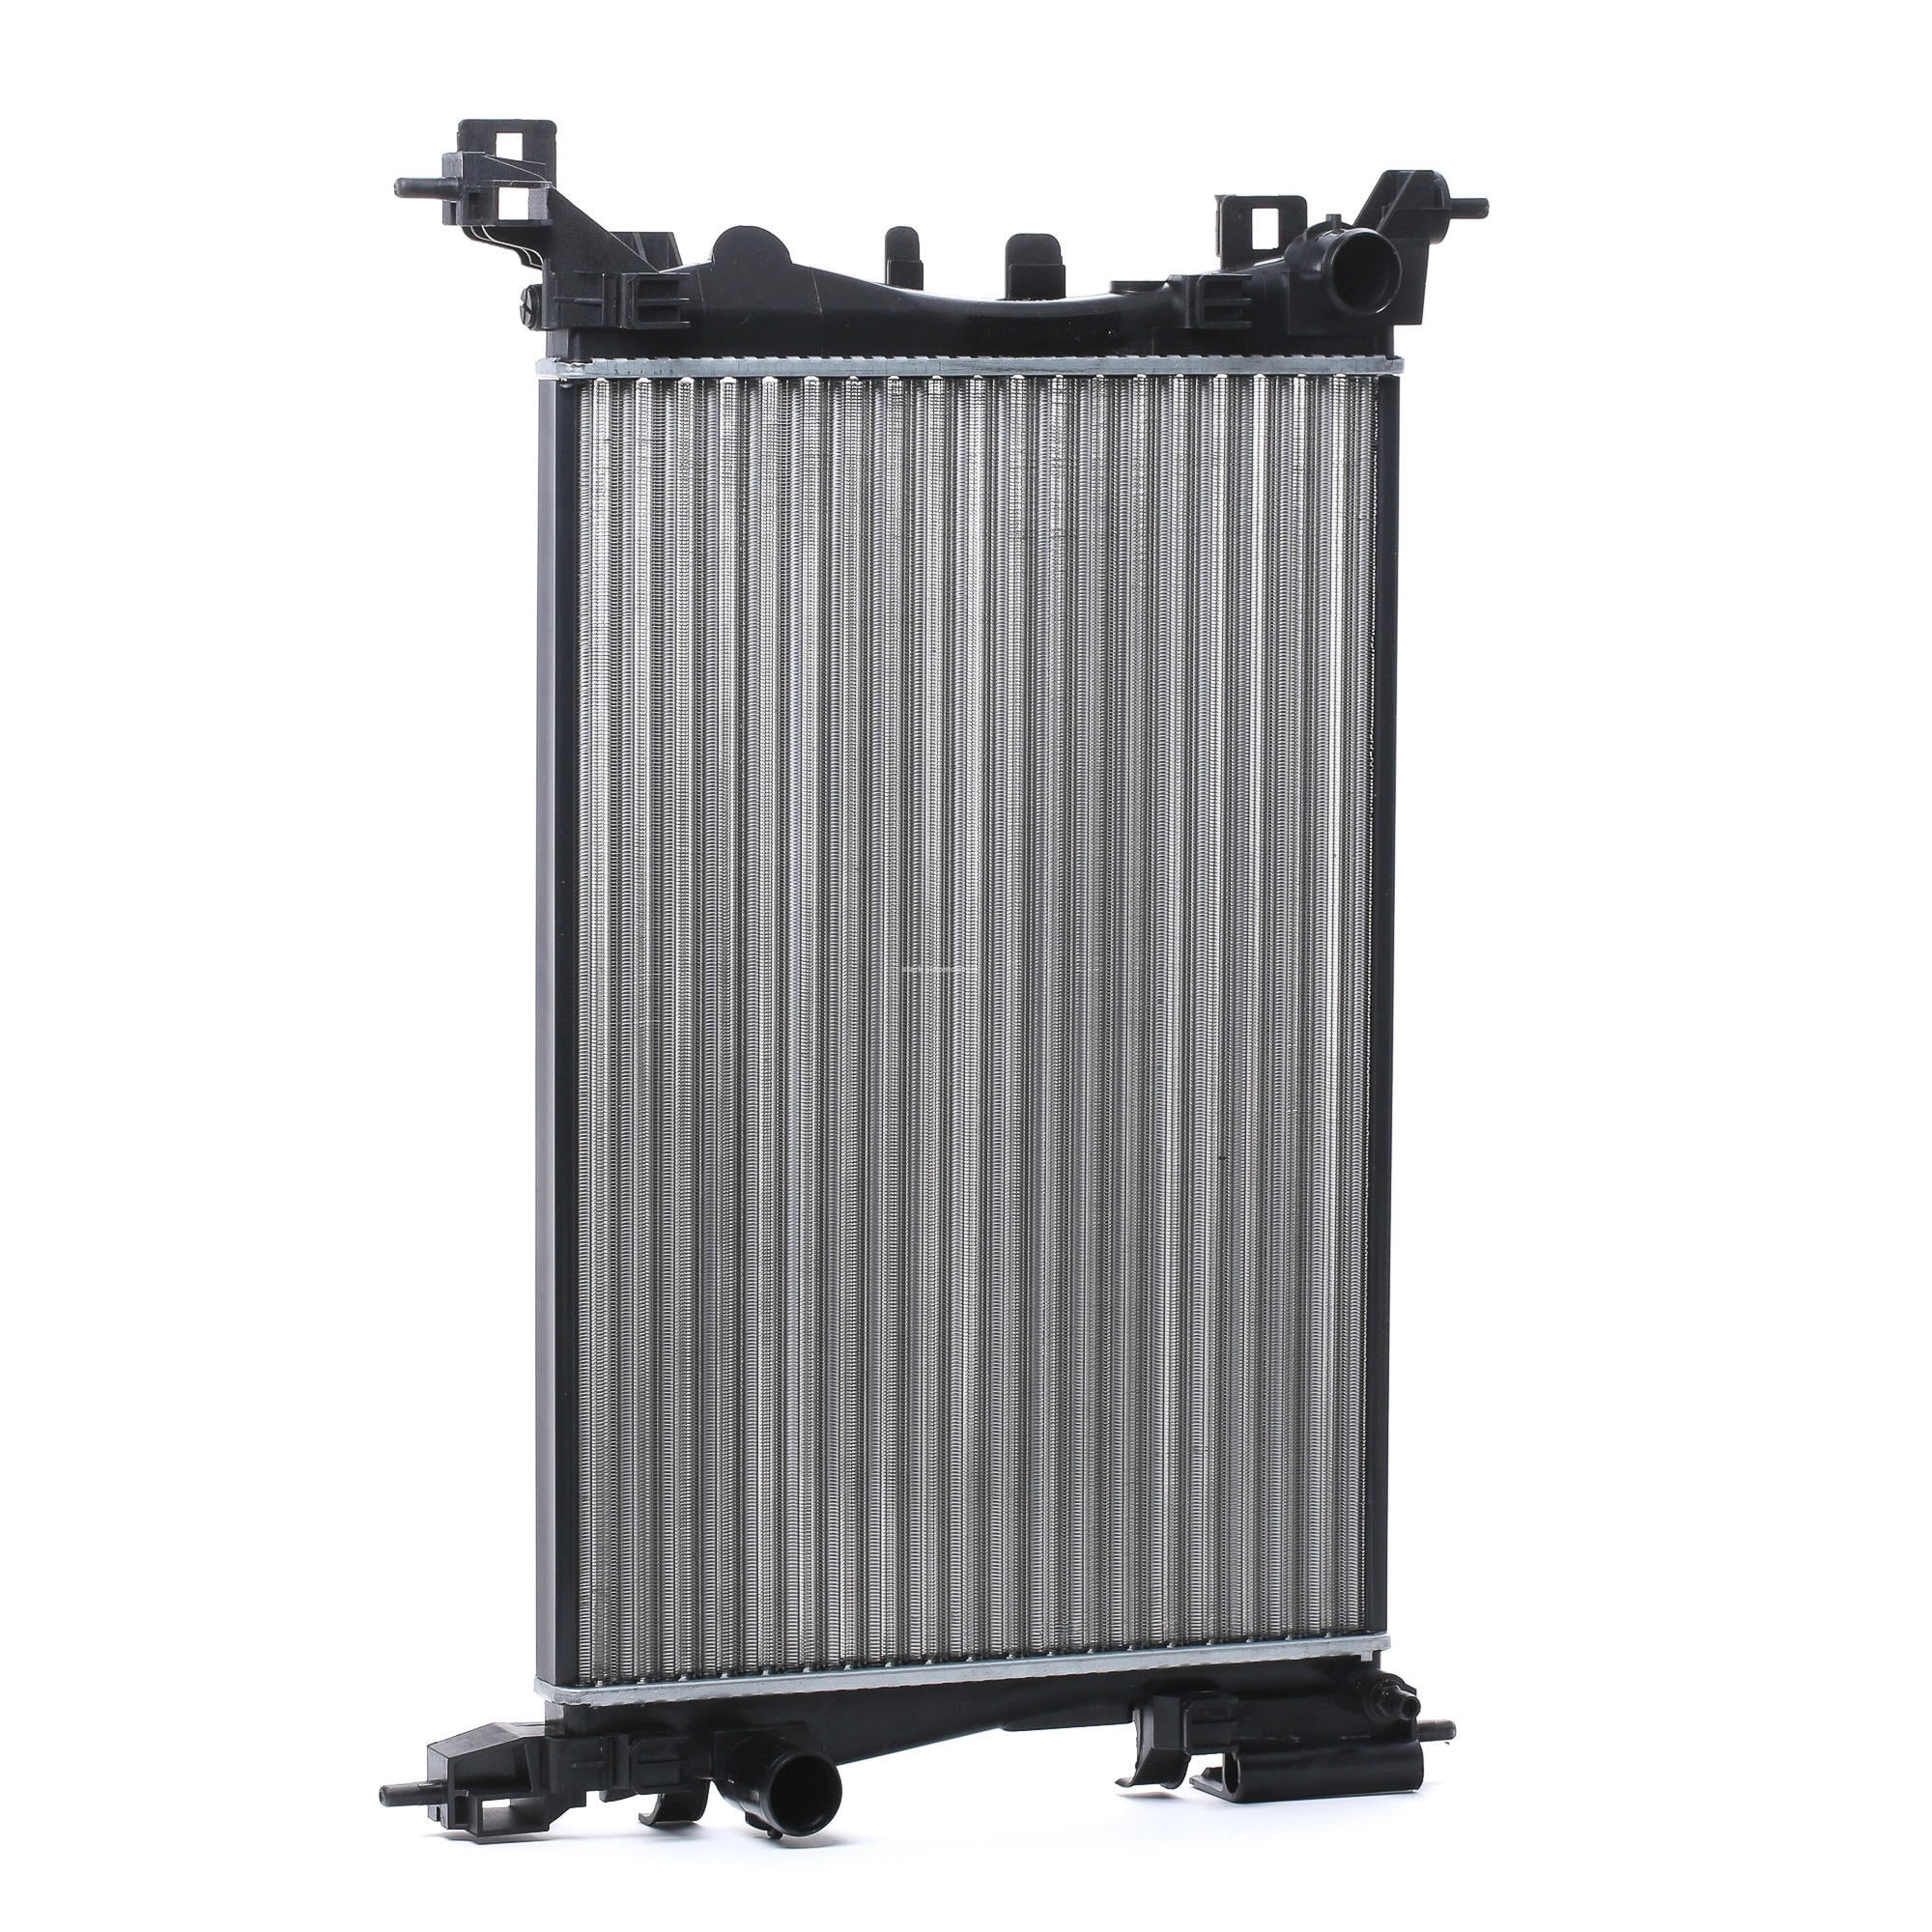 STARK SKRD-0120318 Engine radiator Aluminium, Plastic, for vehicles with/without air conditioning, Manual Transmission